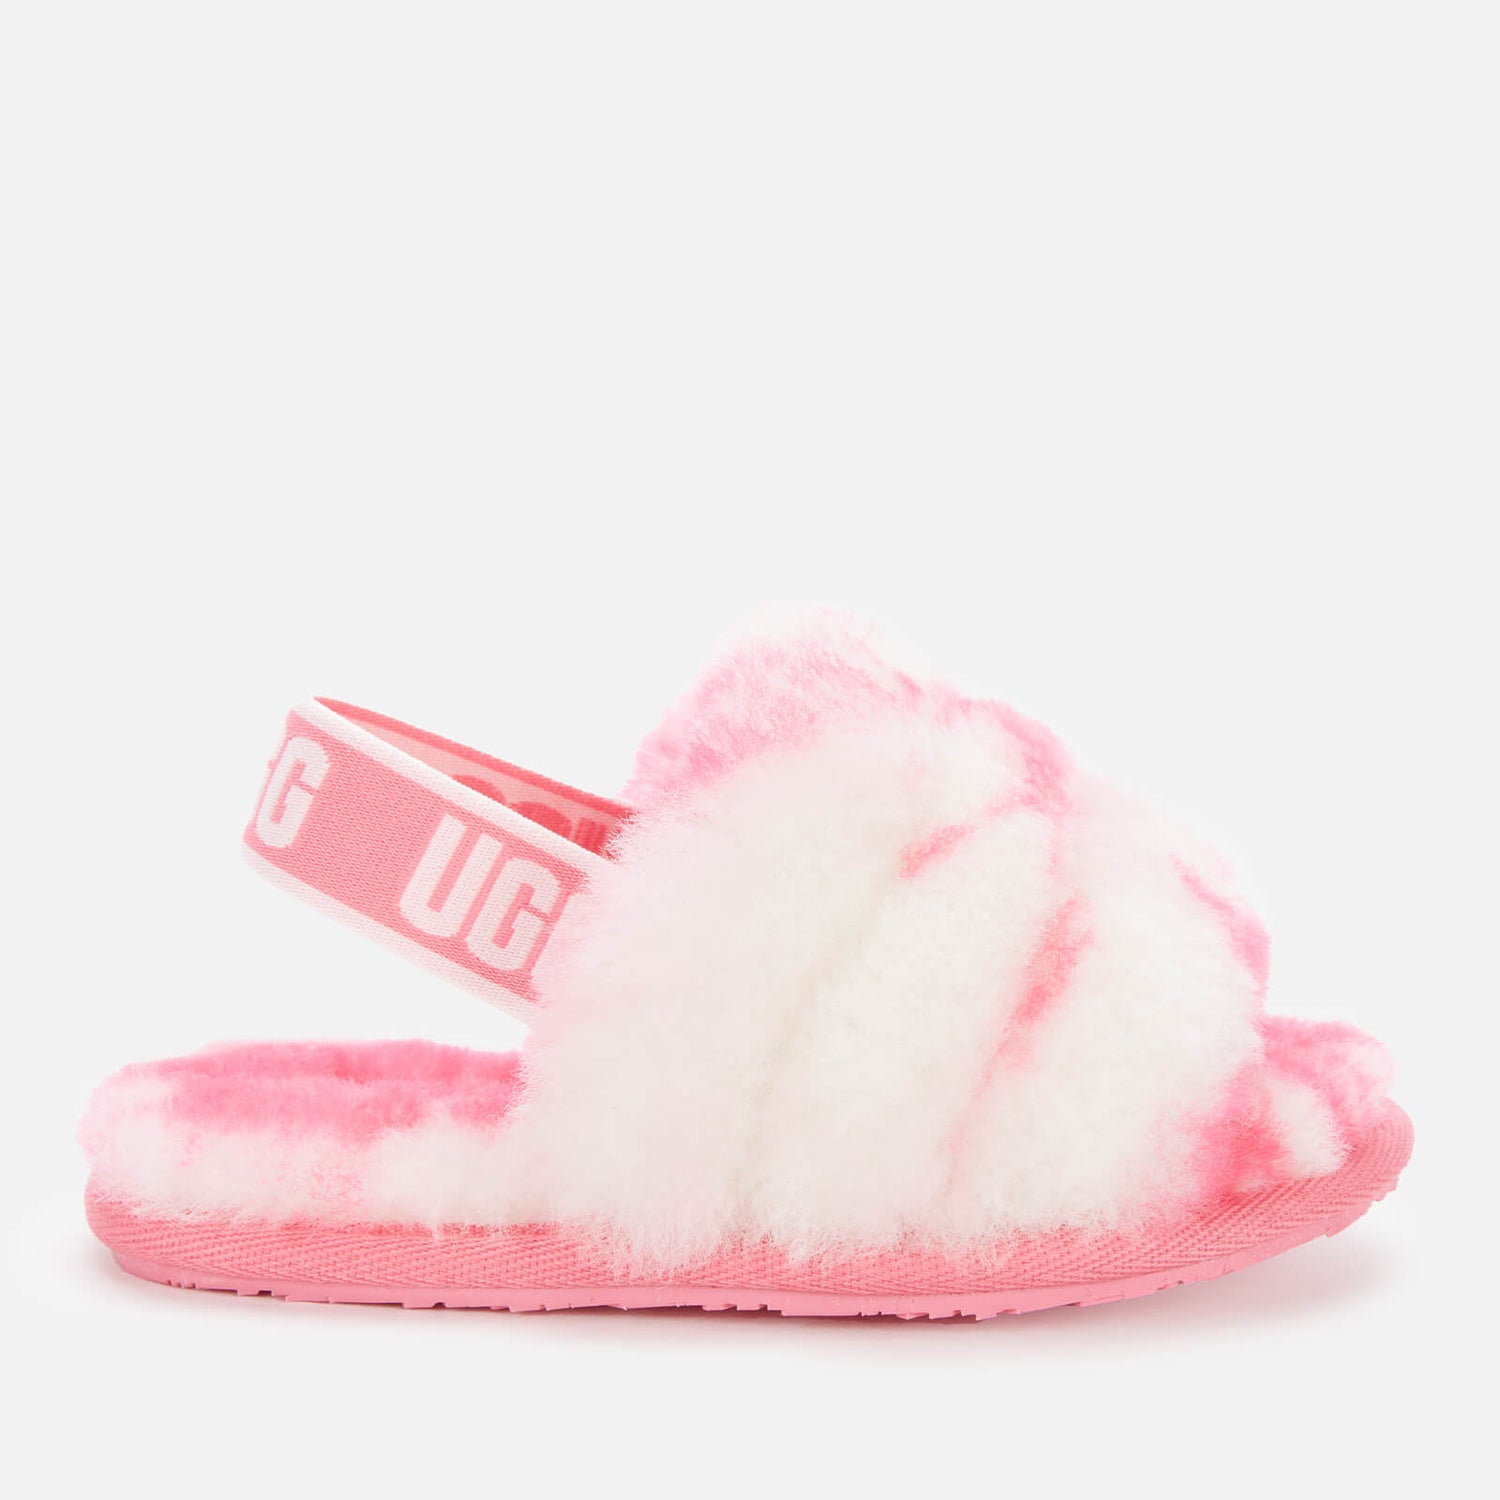 UGG Toddlers' Fluff Yeah Slide Marble Slippers - Pink - UK 5 Toddler